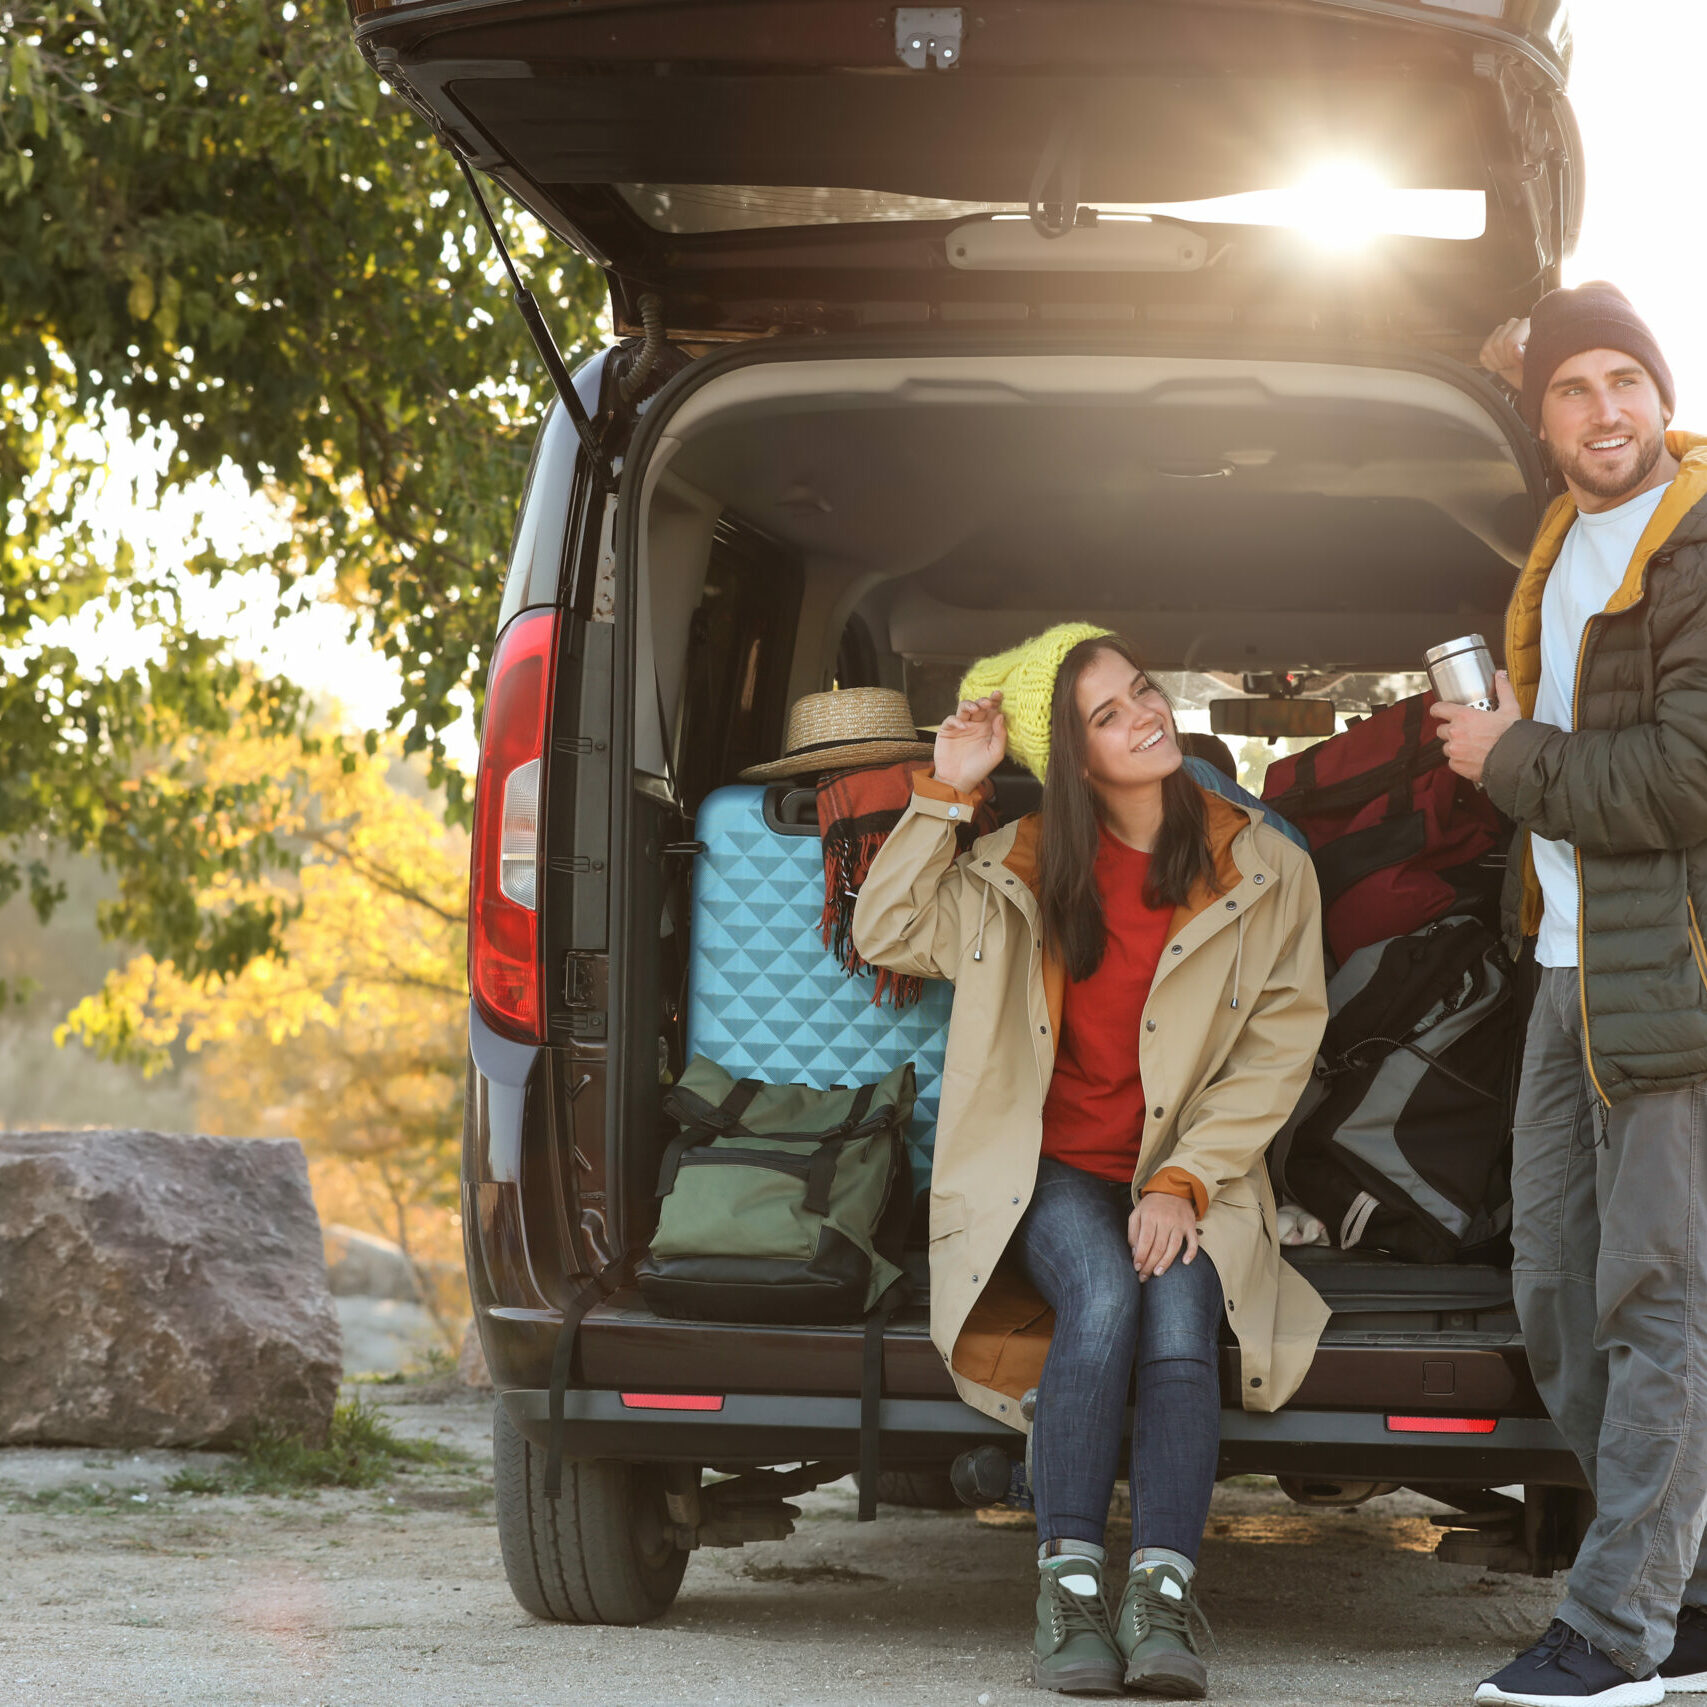 Young couple packing camping equipment into car trunk outdoors